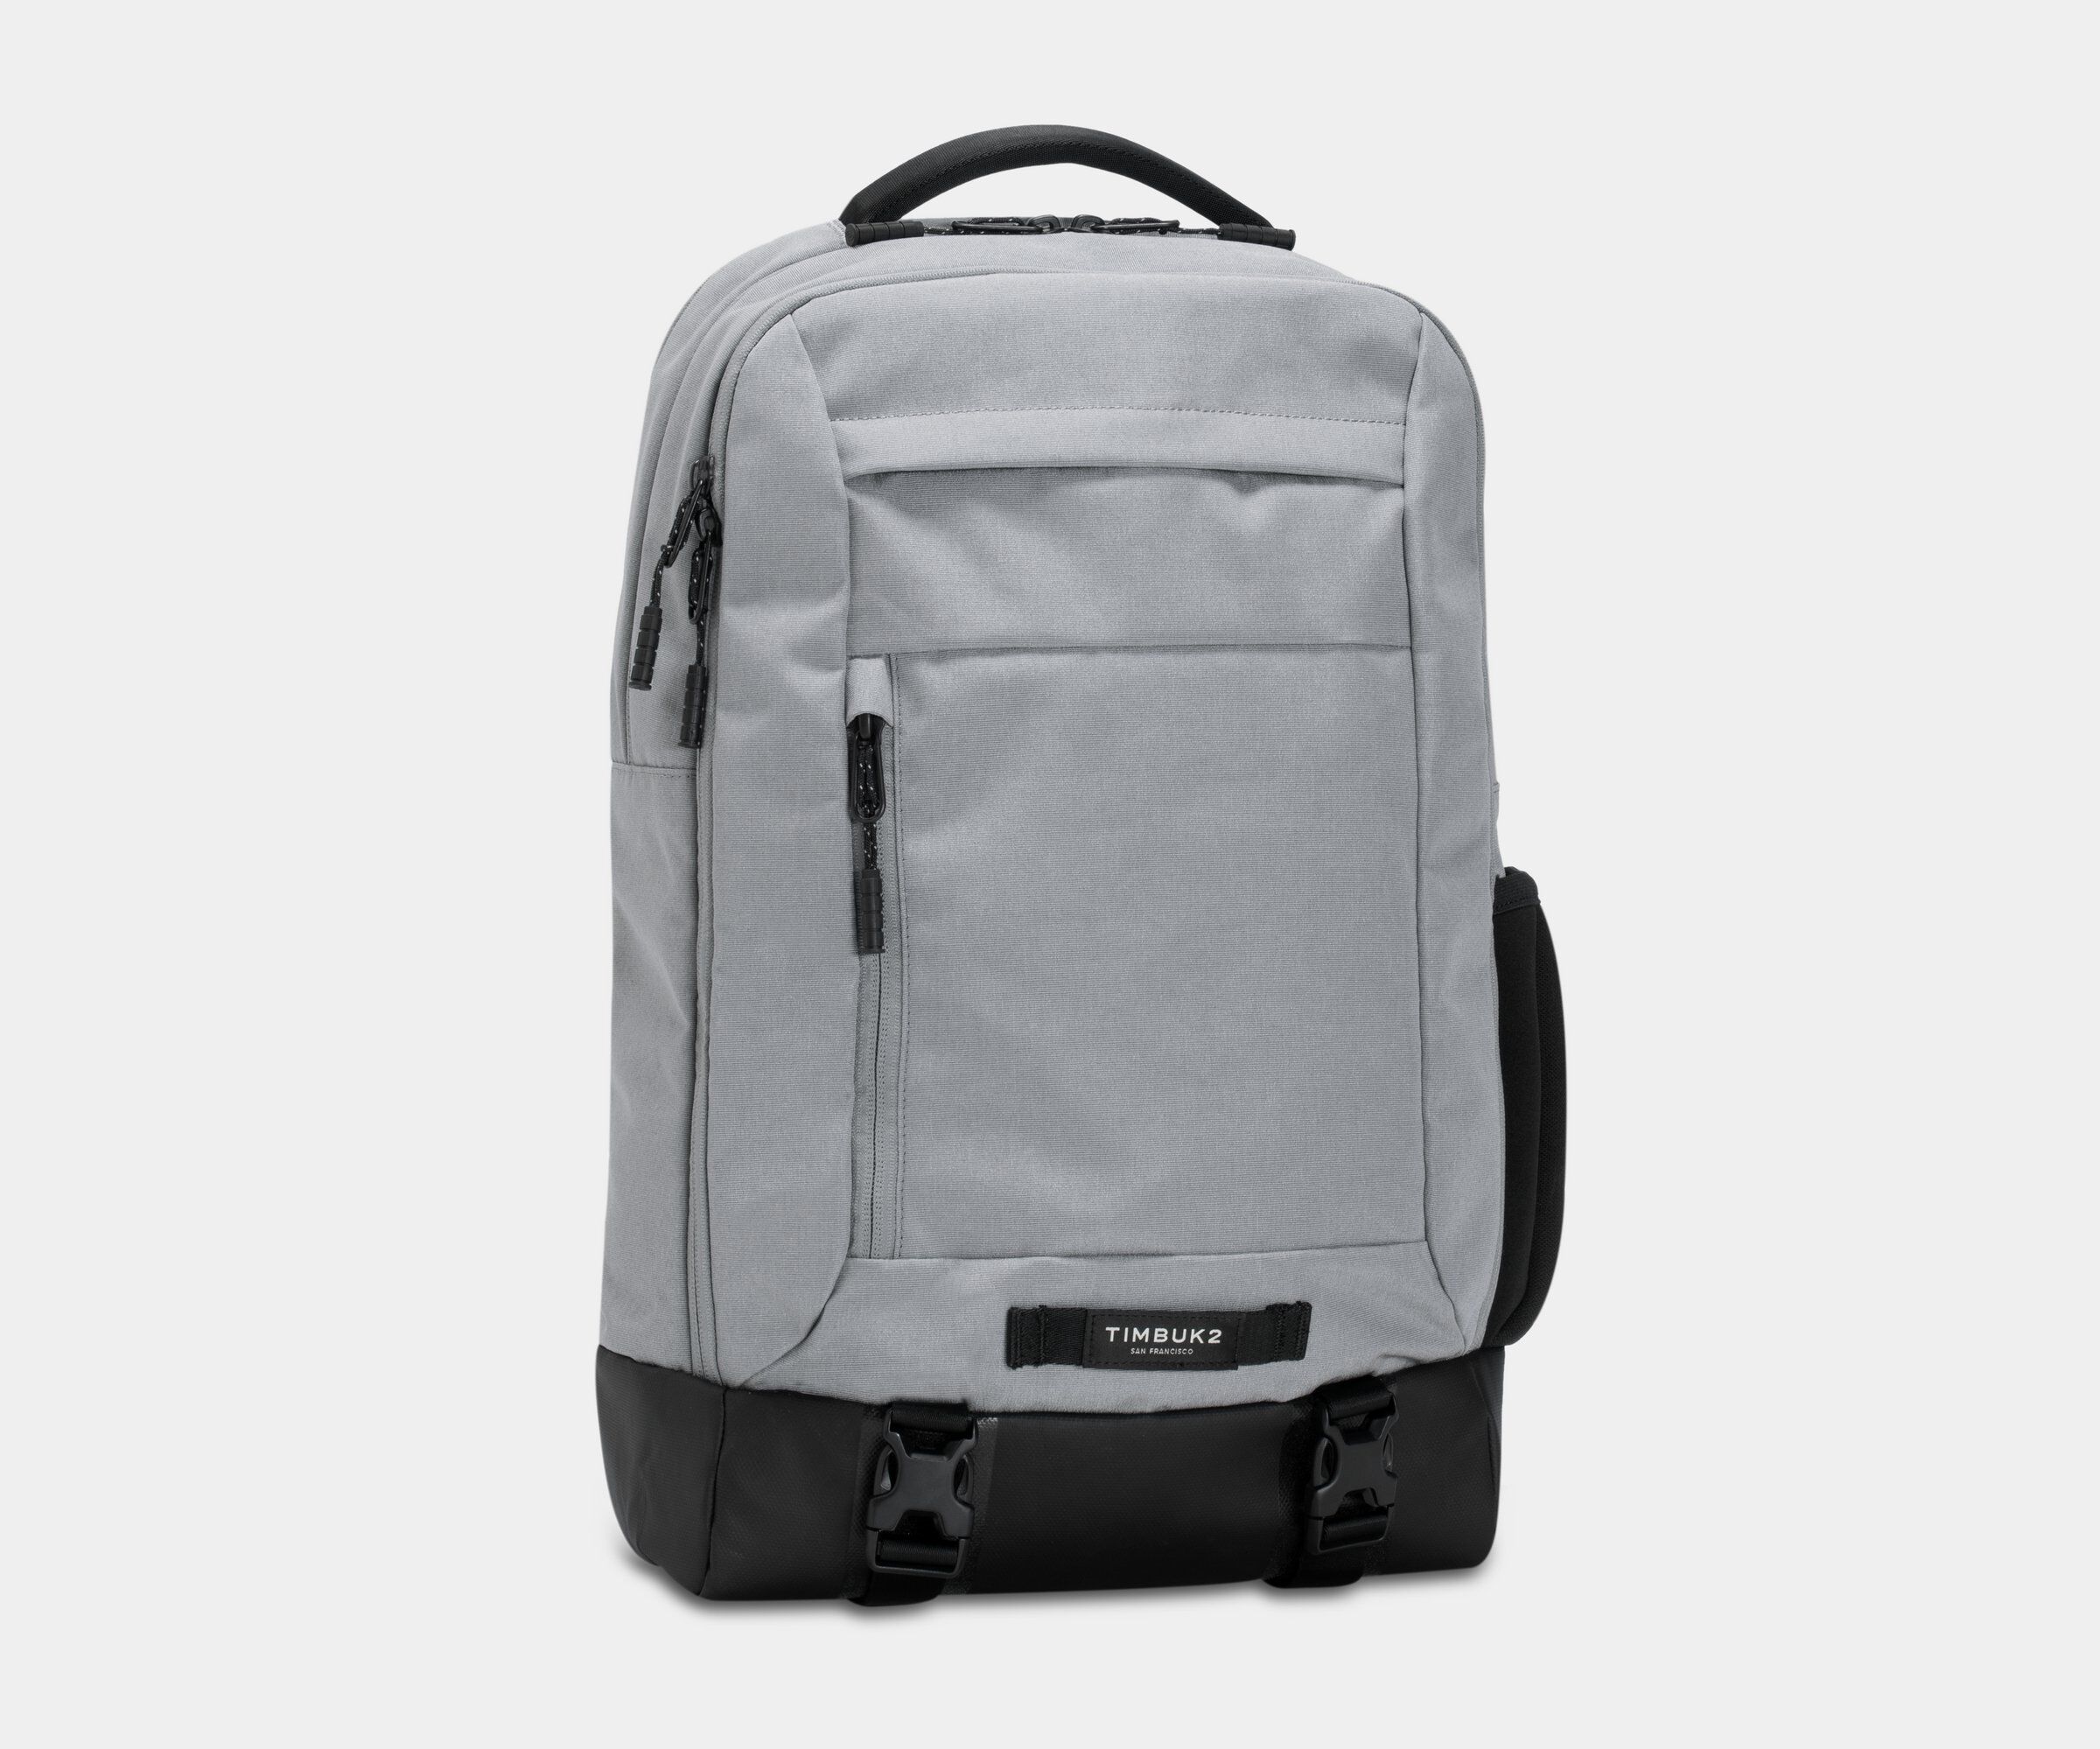 Branded Authority Laptop Backpack Deluxe Dove